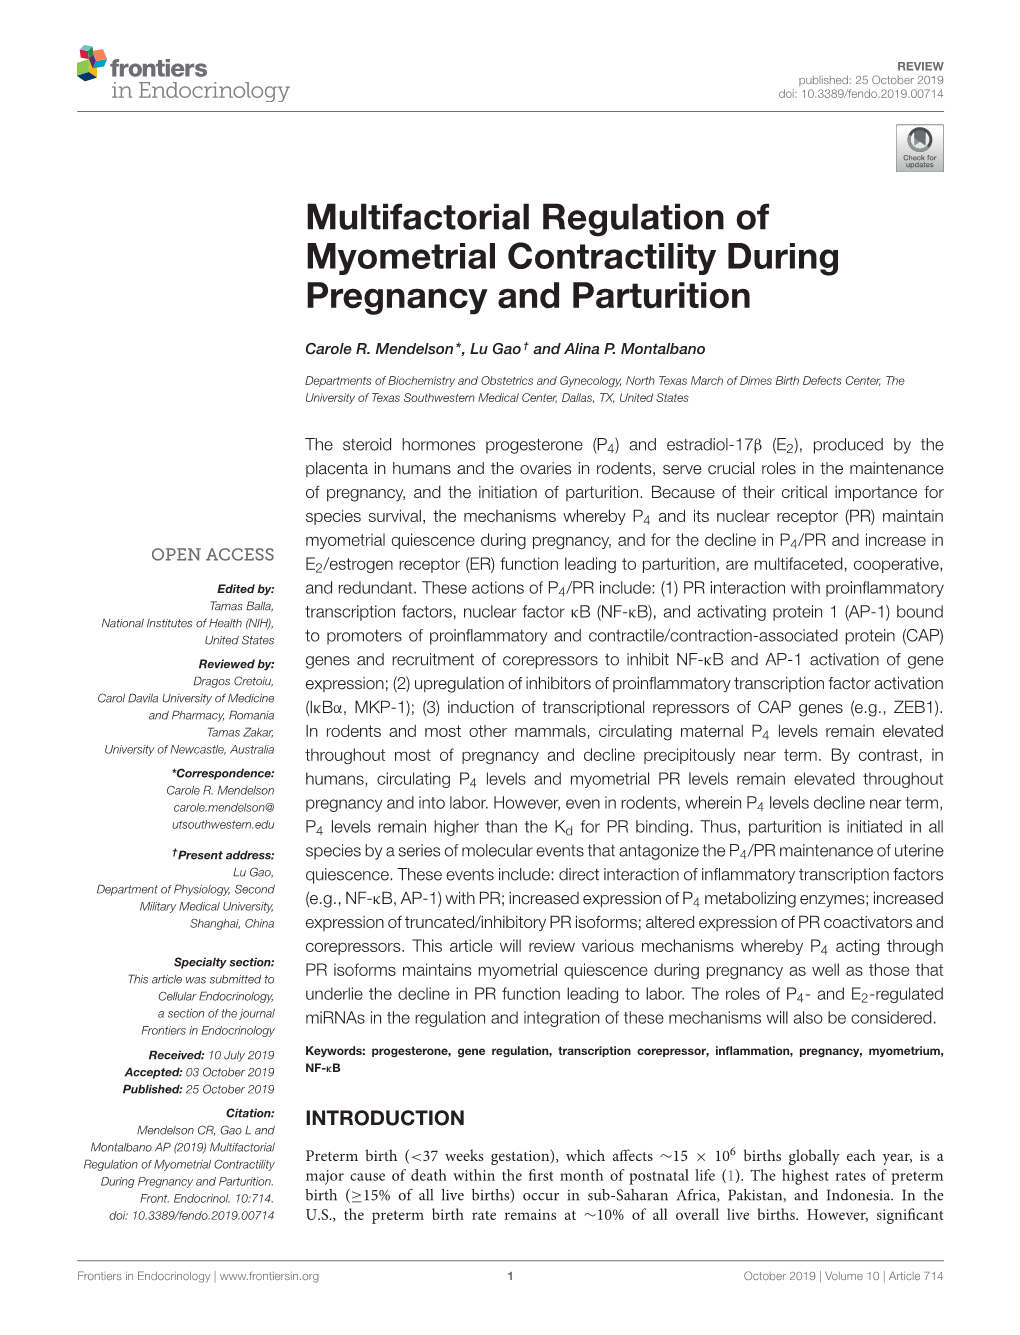 Multifactorial Regulation of Myometrial Contractility During Pregnancy and Parturition